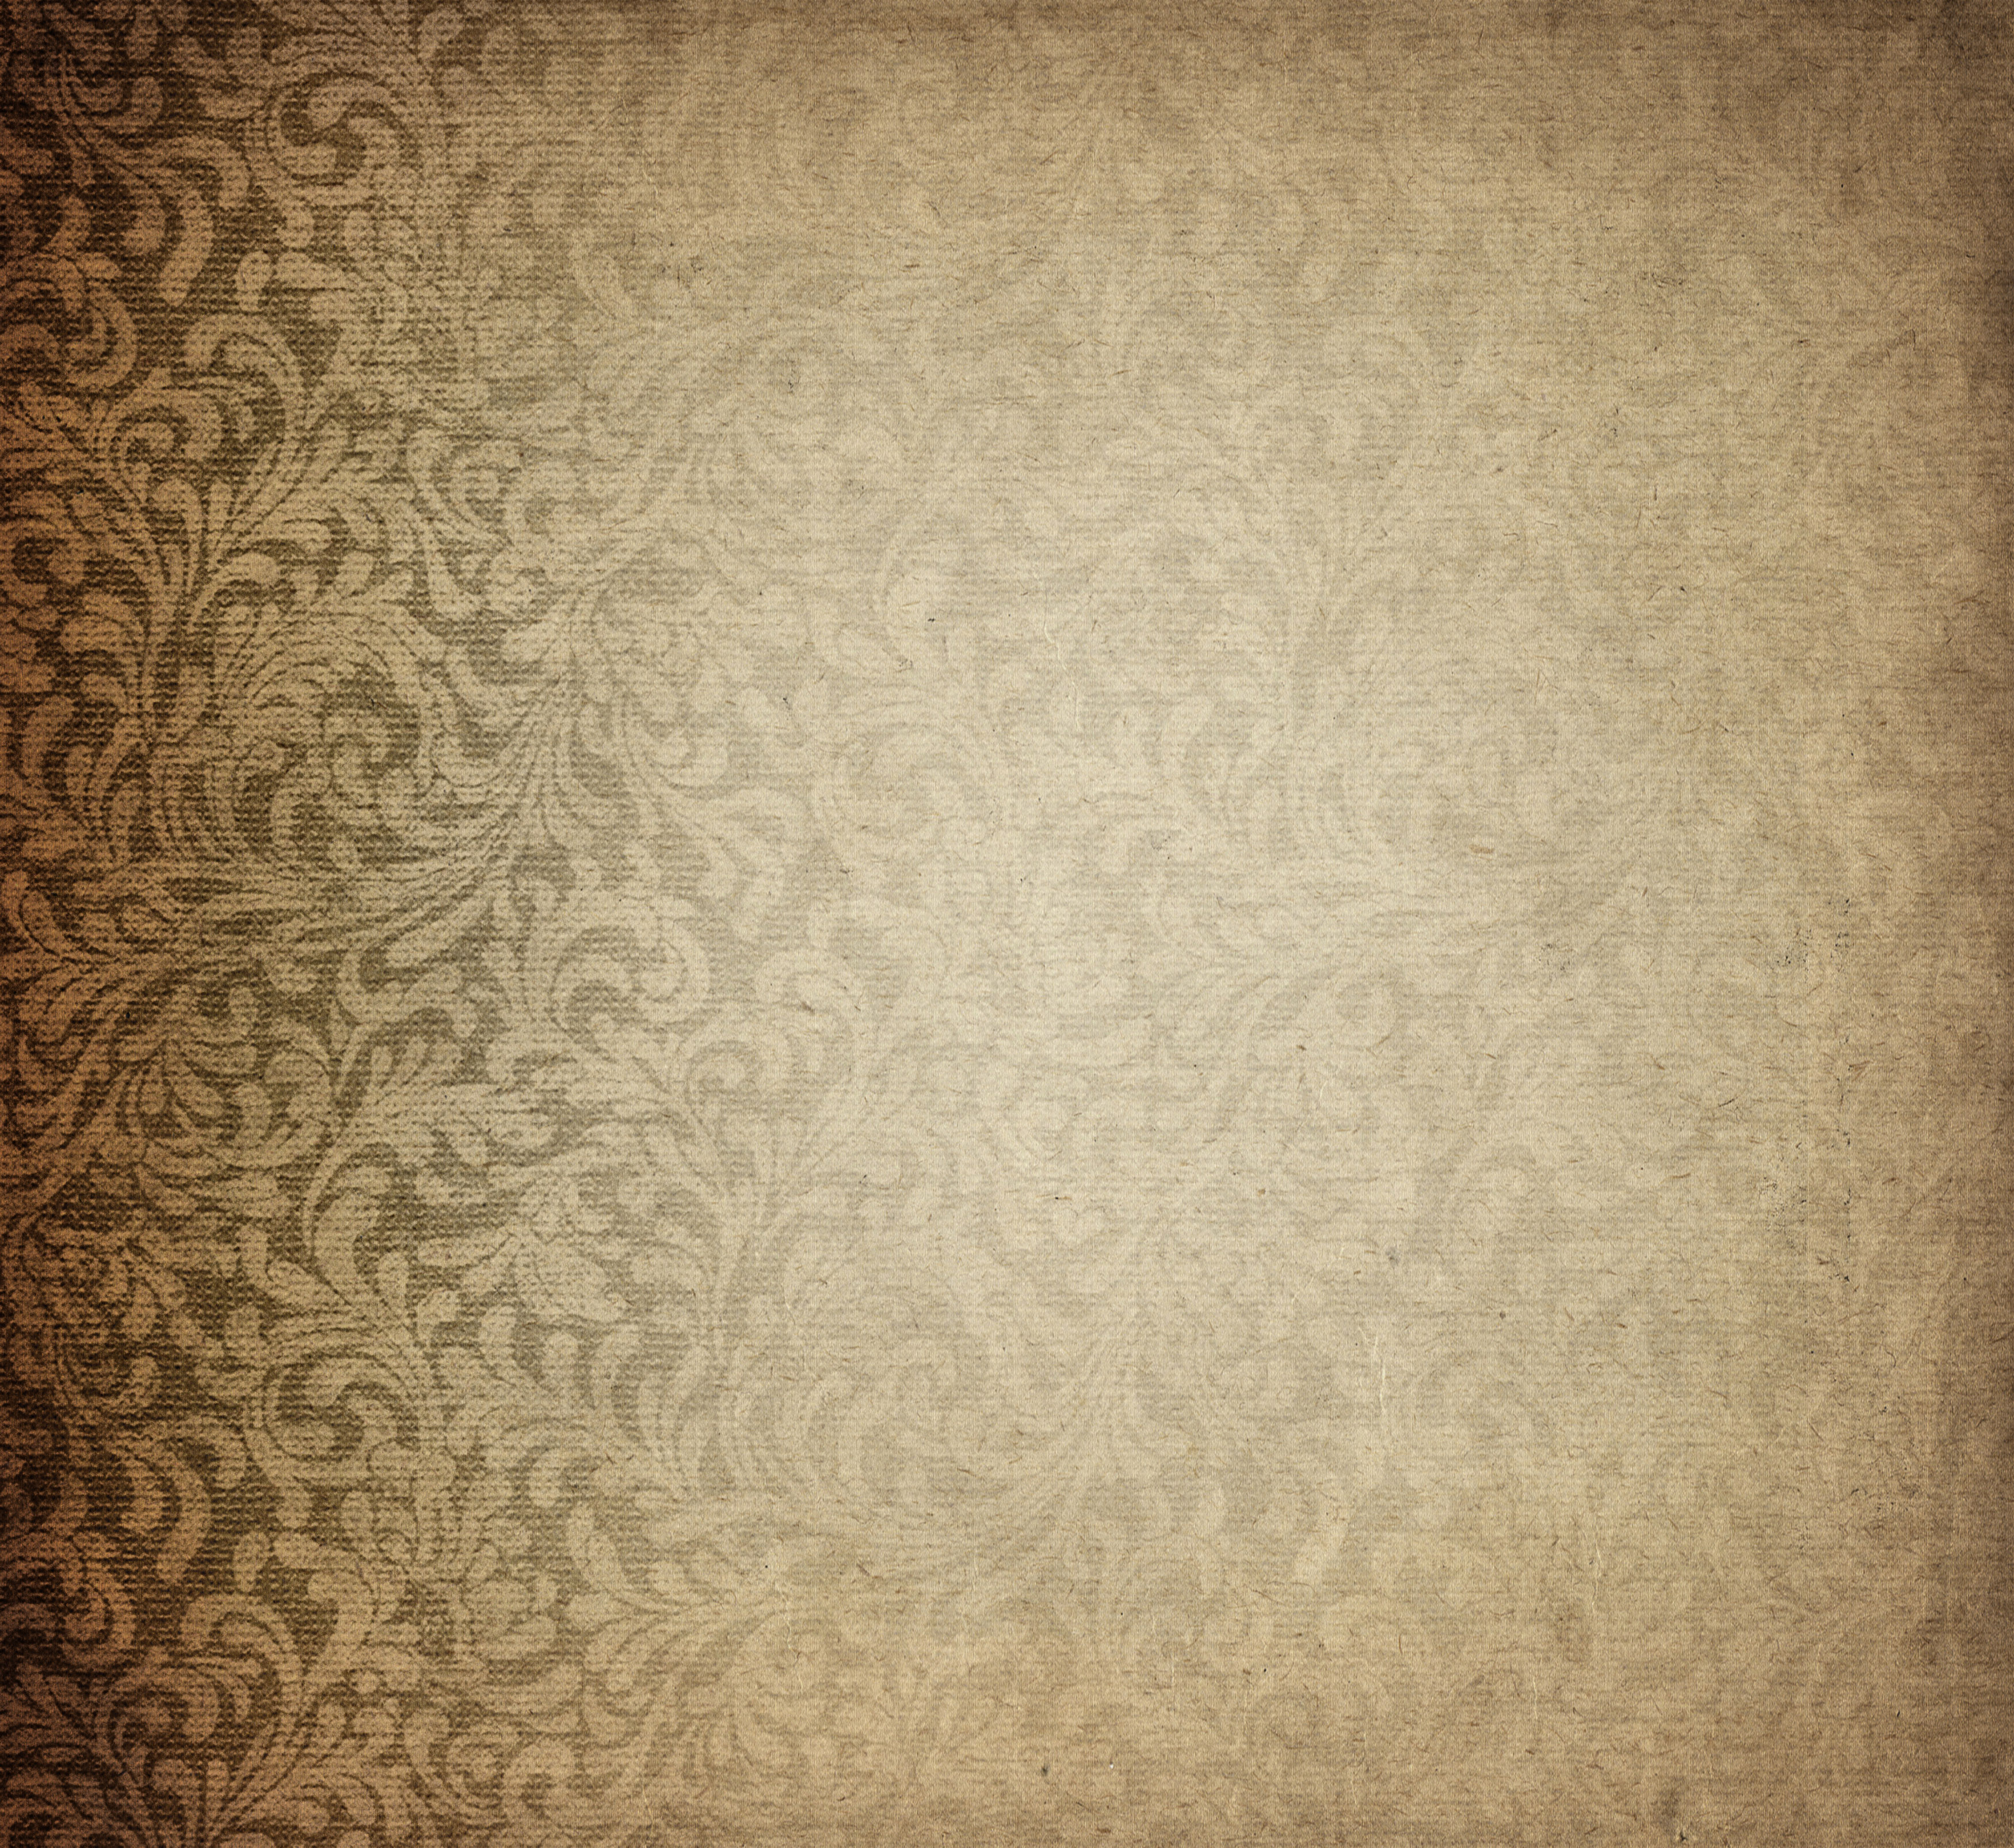 old paper or wallpaper with paisley design wwwmyfreetexturescom